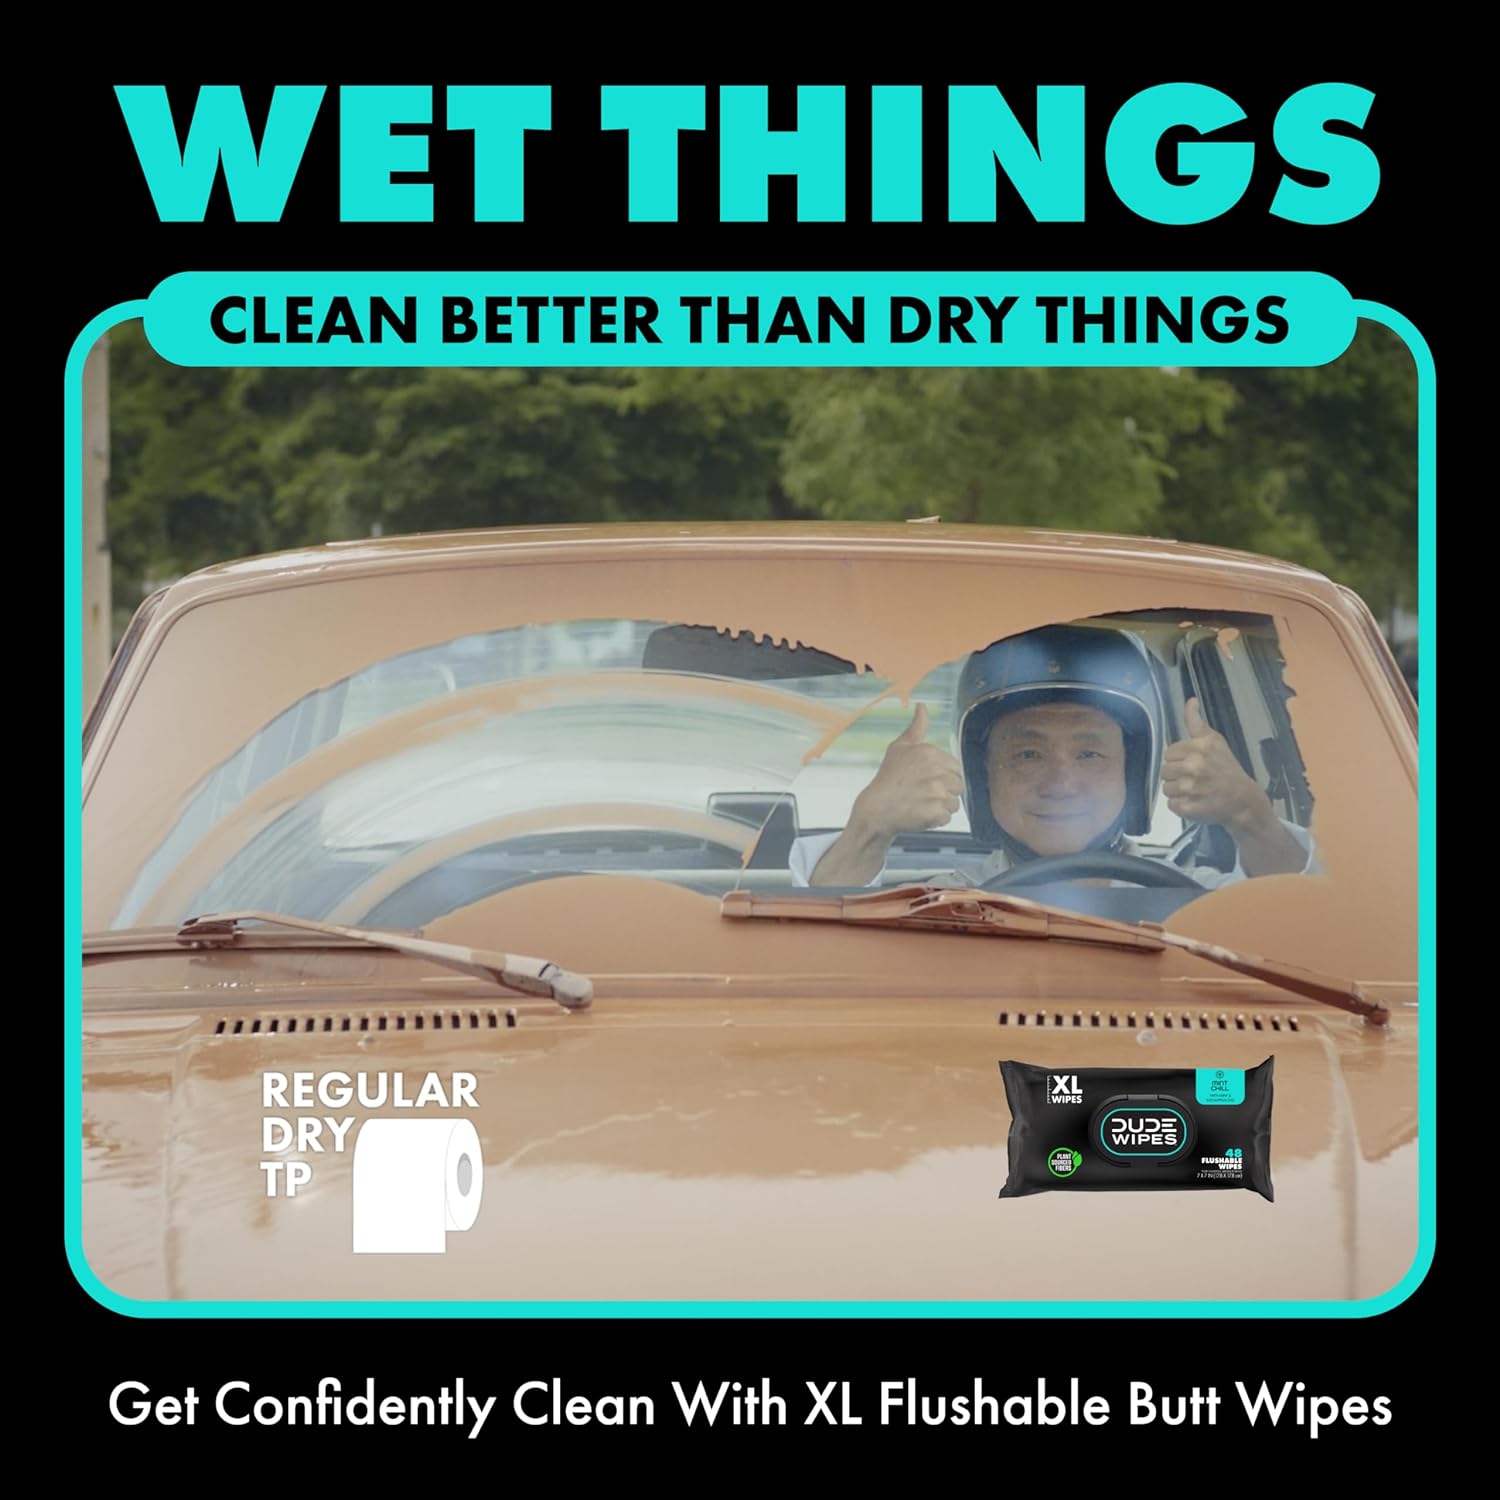 DUDE Wipes - Flushable Wipes - 3 Pack, 144 Wipes - Mint Chill Extra-Large Adult Wet Wipes - Vitamin-E, Aloe, Eucalyptus & Tea Tree Oils - Septic and Sewer Safe - Medaid - Lebanon